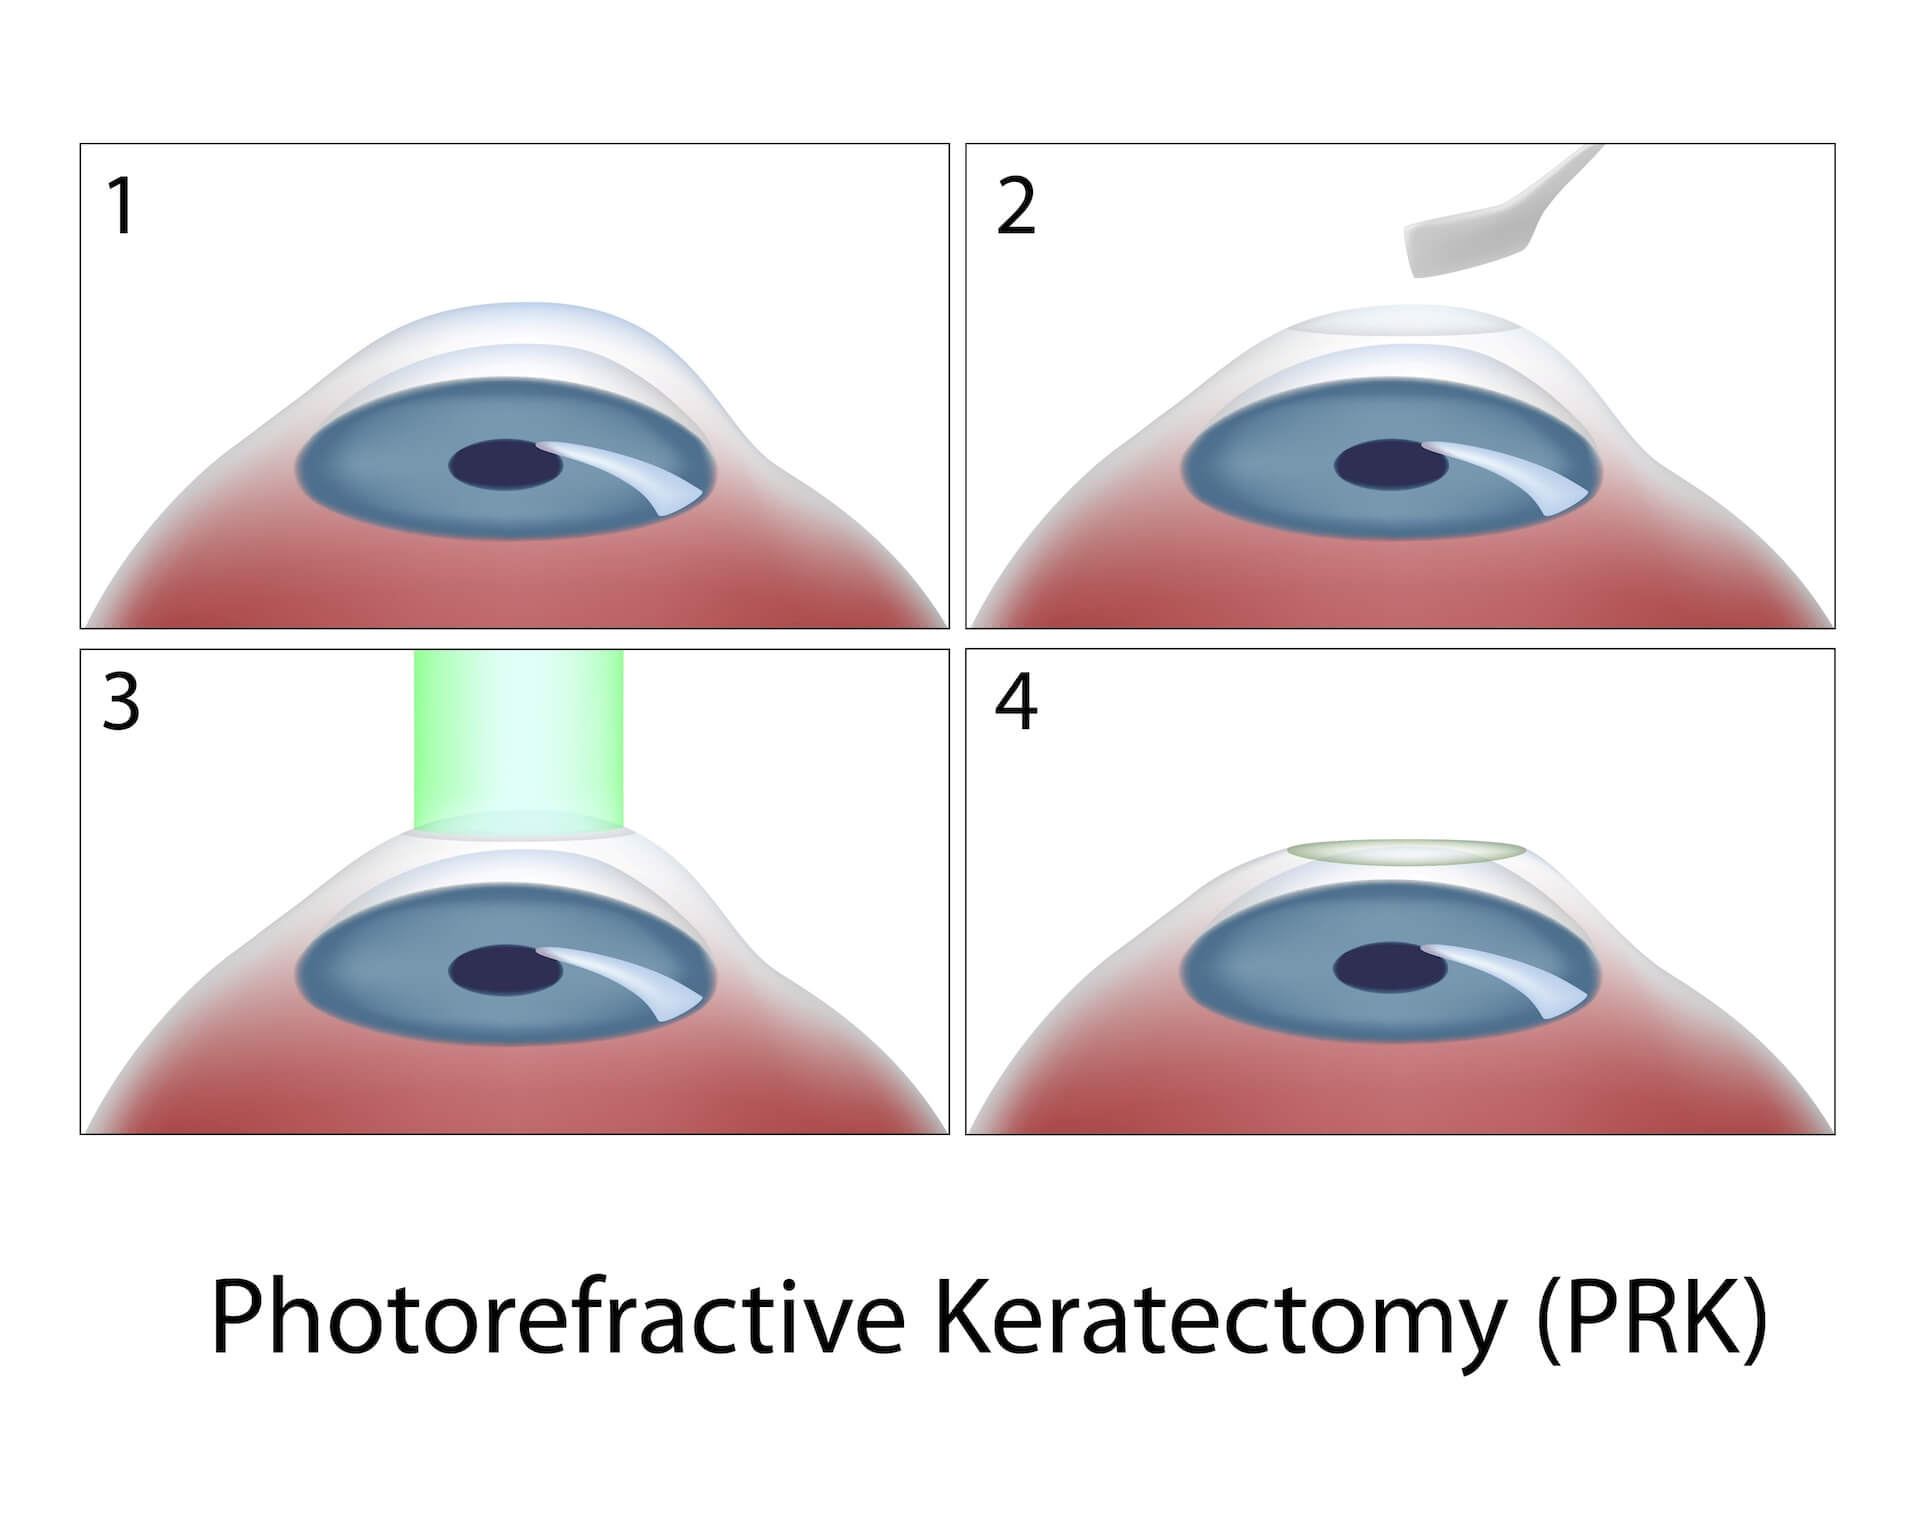 Diagram showing the steps of Photorefractive Keratectomy (PRK) surgery